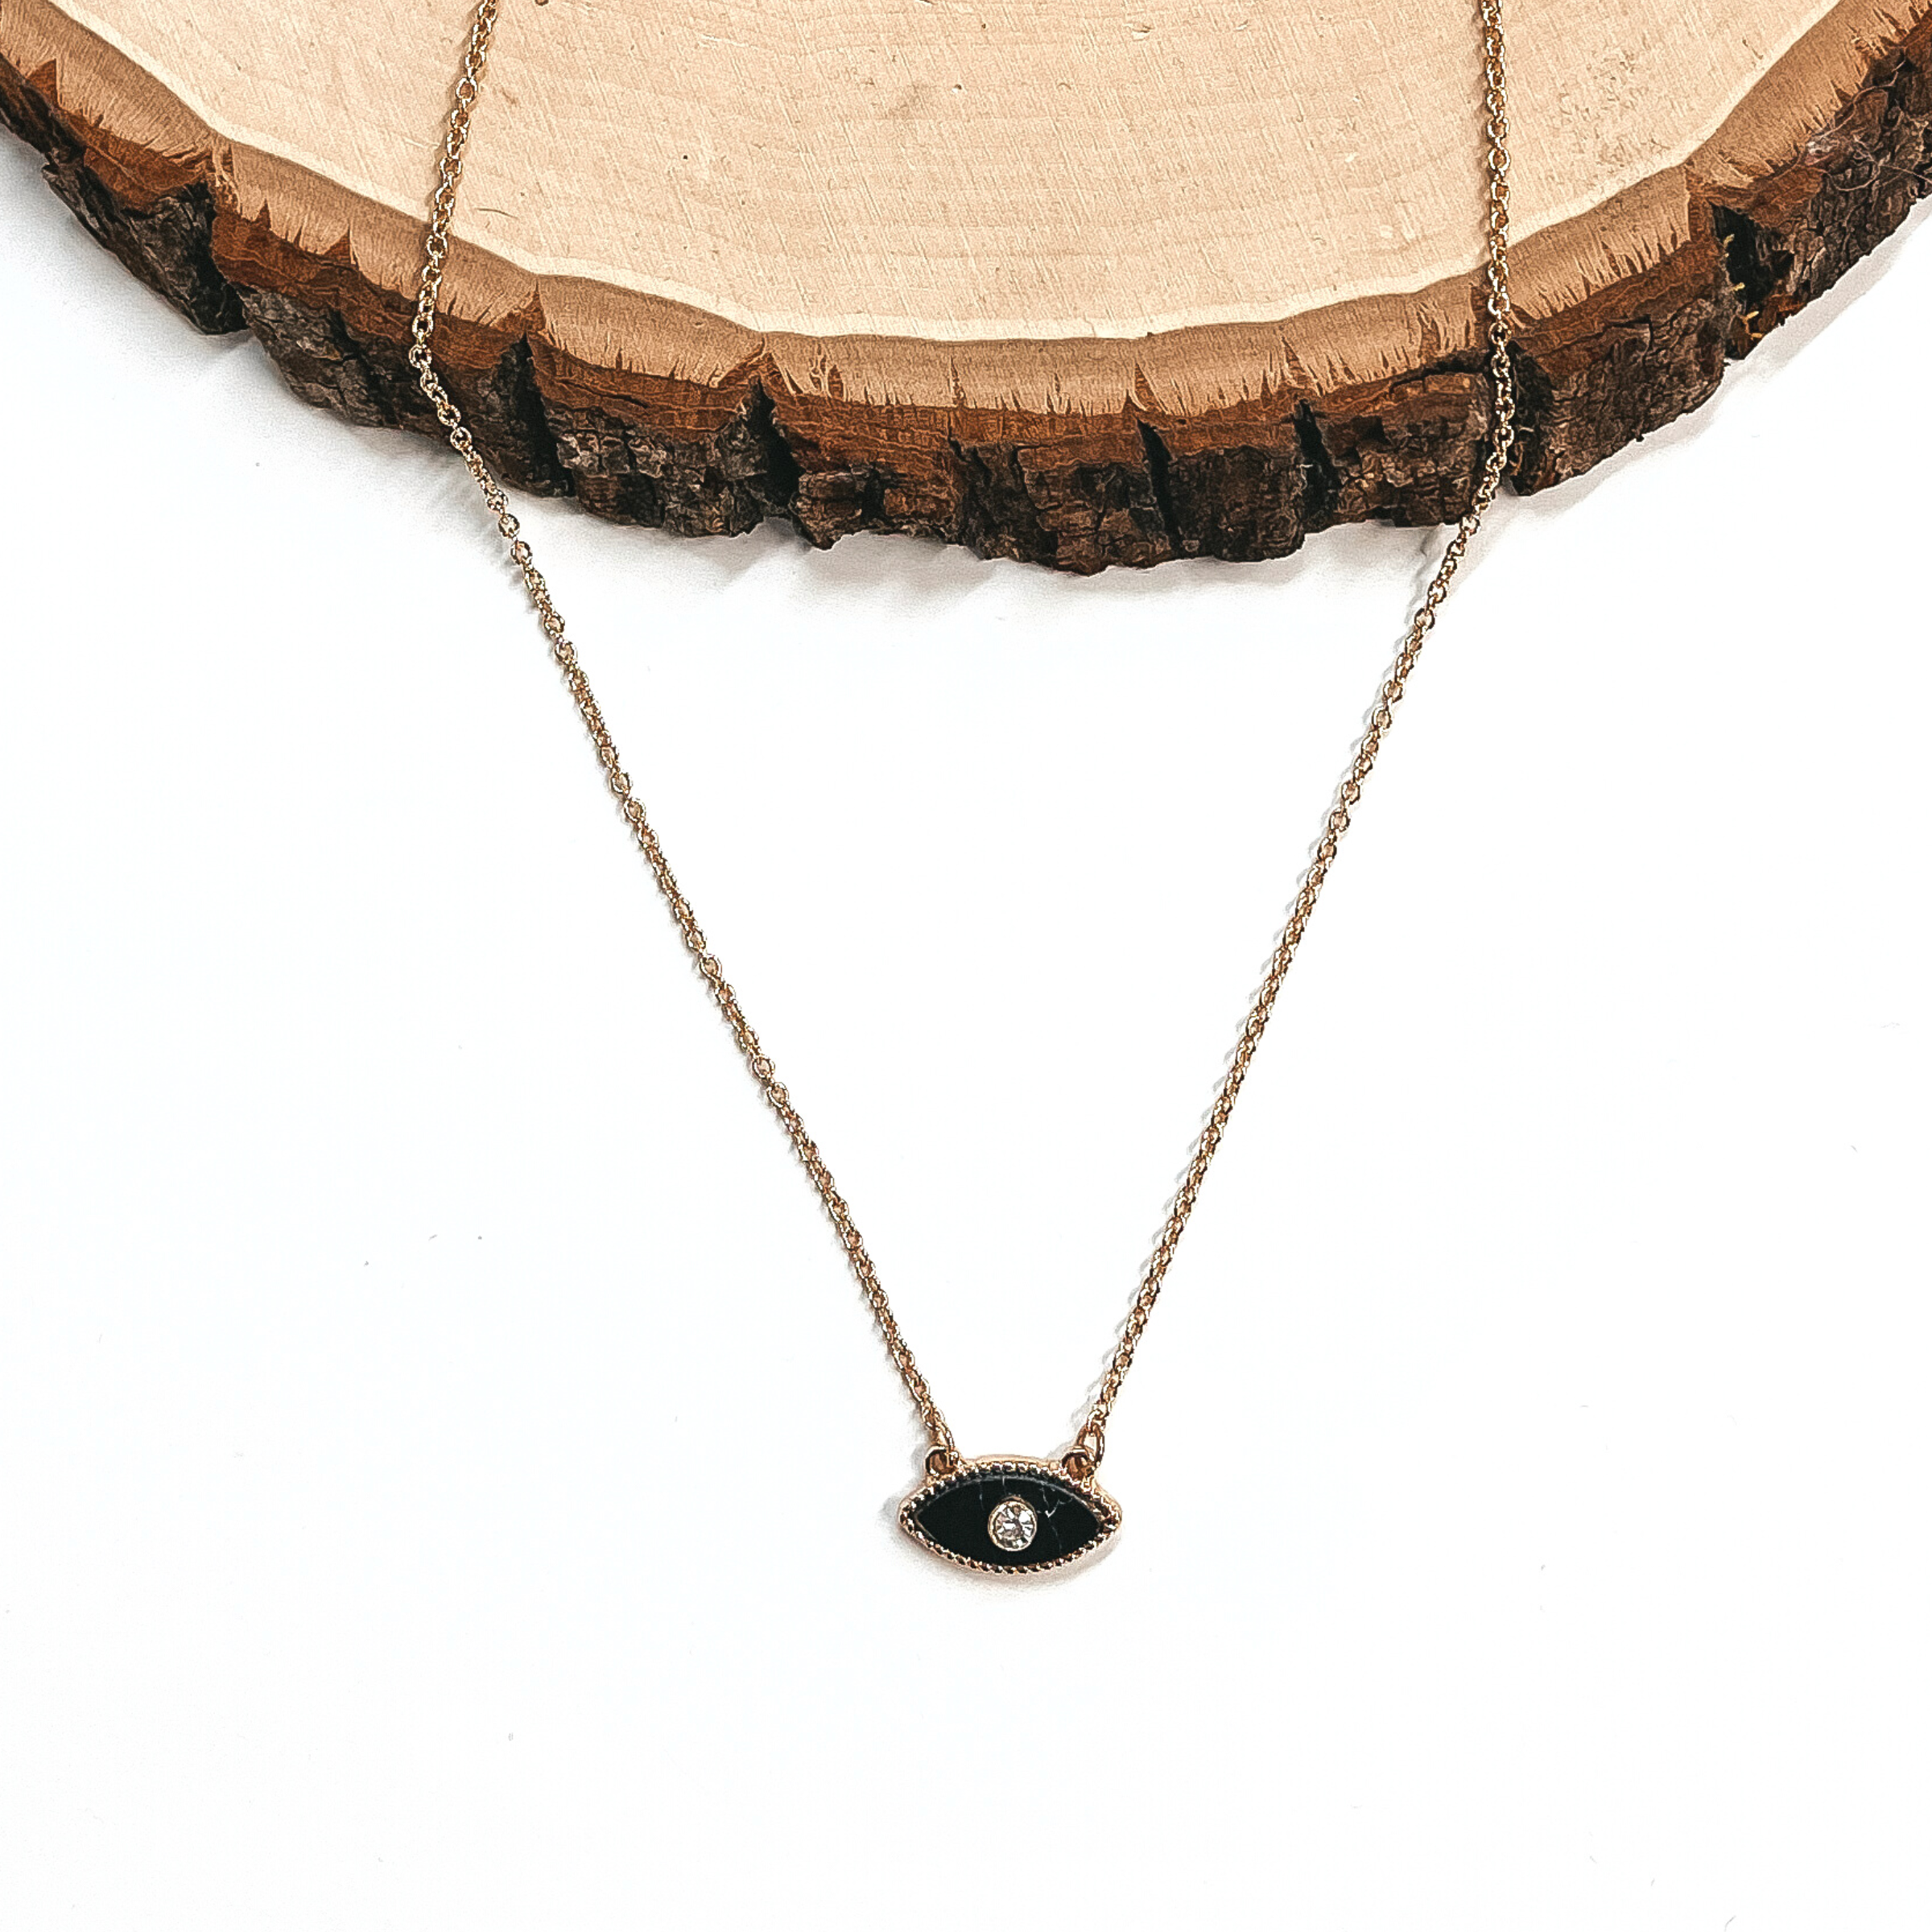 This is a small thin gold necklace with a black evil eye charm in the middle,  with a small clear crystal in the charm. This necklace is laying on a white  background and on a slab of wood.